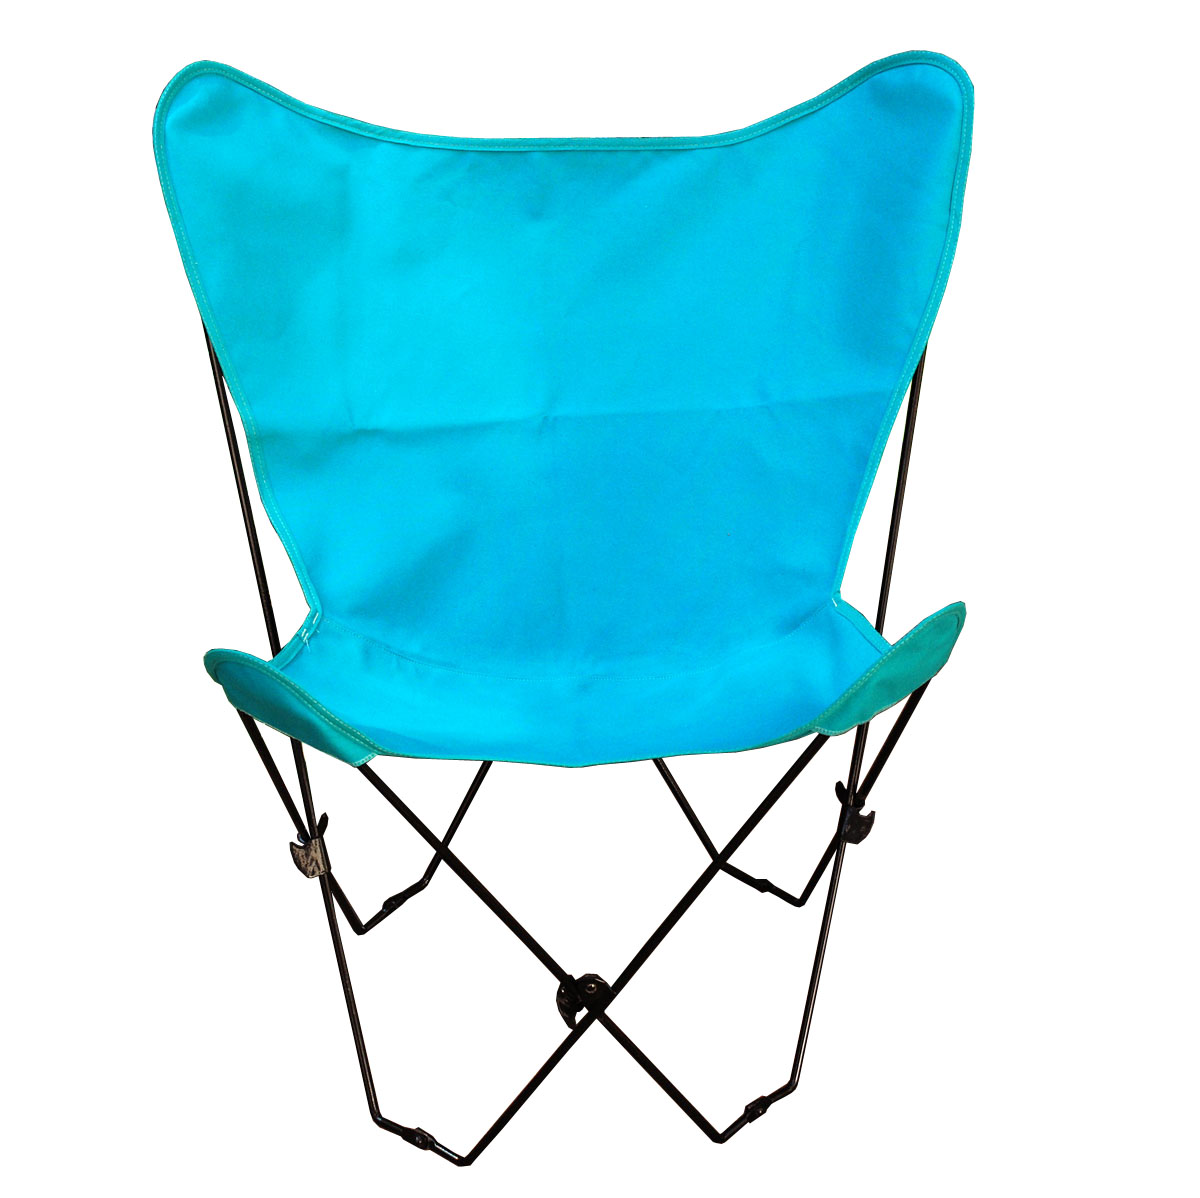 CC Outdoor Living 35" Teal Blue Outdoor Patio Butterfly Chair and Cover Combination with White Frame - image 1 of 1